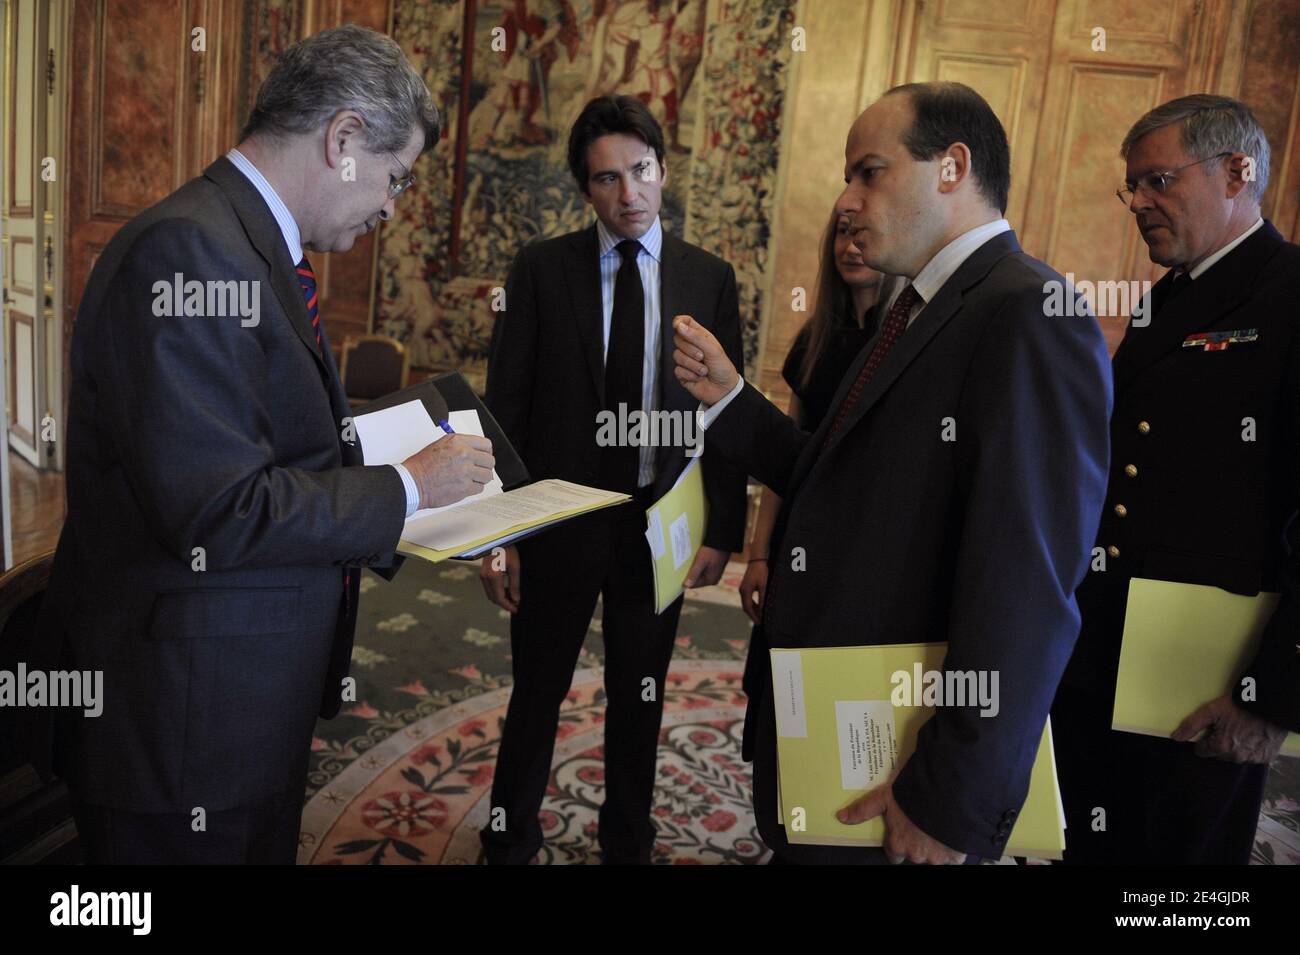 French President's diplomatic advisor and sherpa Jean-David Levitte speaks with Olivier Colom and French President's advisor technical at the diplomatic committee charged with Americas, Russia, the Caucasus, Balkans and the Central Asia Damien Loras during the visit of Brazilian President at the Elysee presidential Palace in Paris, France on November 14, 2009. Lula arrived in Europe on November 14 to attend a UN food agency meeting in Rome and discuss climate change and military jets in Paris, to boost Brazil's air force's capabilities of patrolling the Amazon and offshore oil fields. Photo by Stock Photo